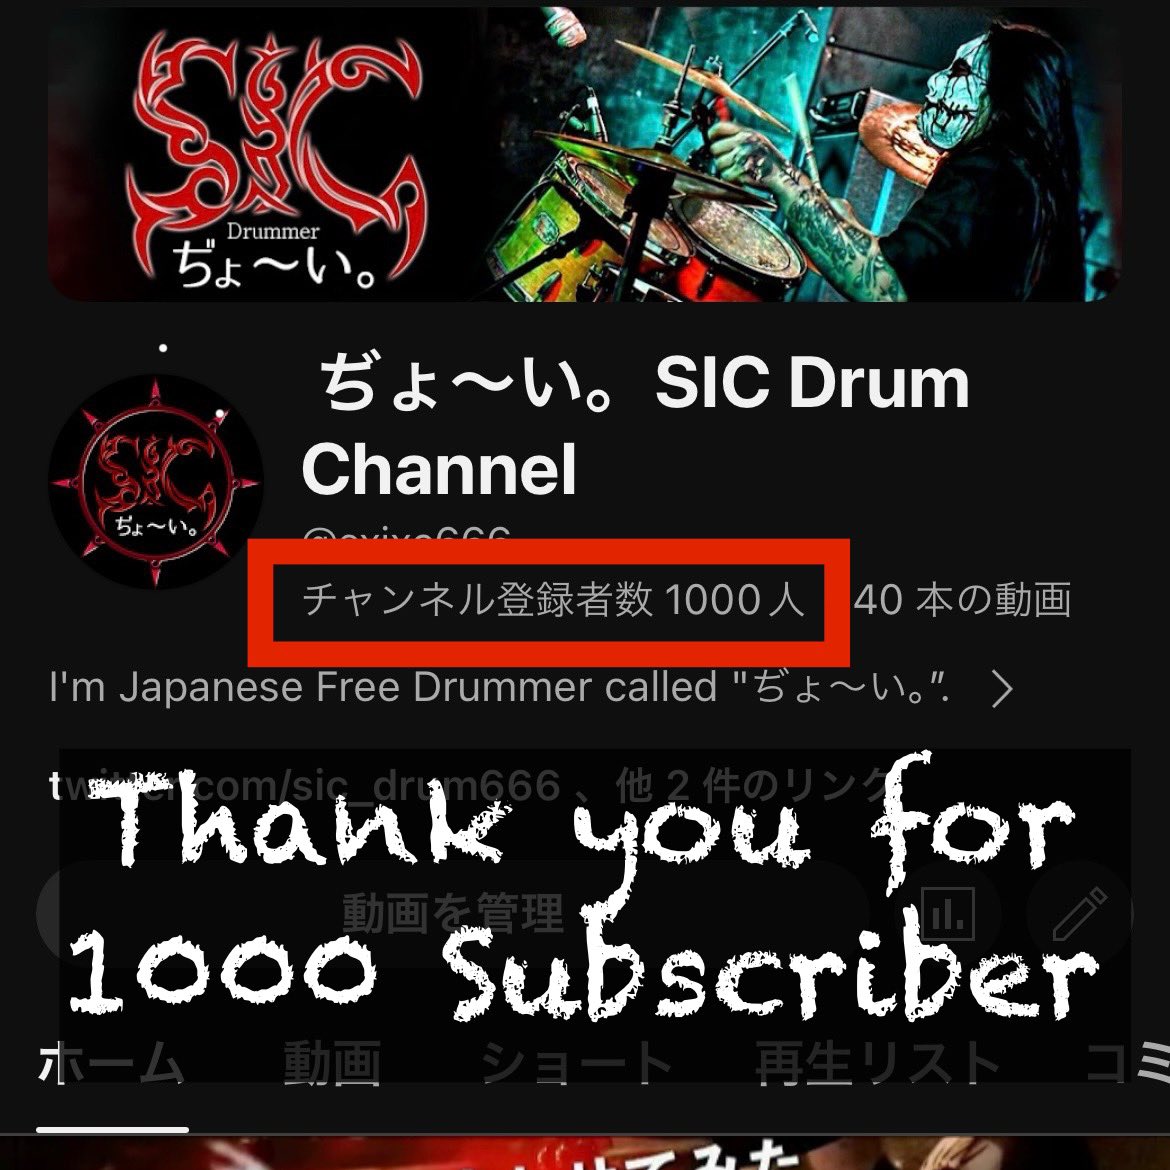 Hi! Good morning.

When I woke up and checked my channel, I had 1000 subscribers.
Cleared one mission.

Thank you to everyone around the world.

I will continue to increase our own content in the future.

#ぢょ〜い
#drummer
#youtube
#1000subscribers
#sic

youtube.com/@sxixc666